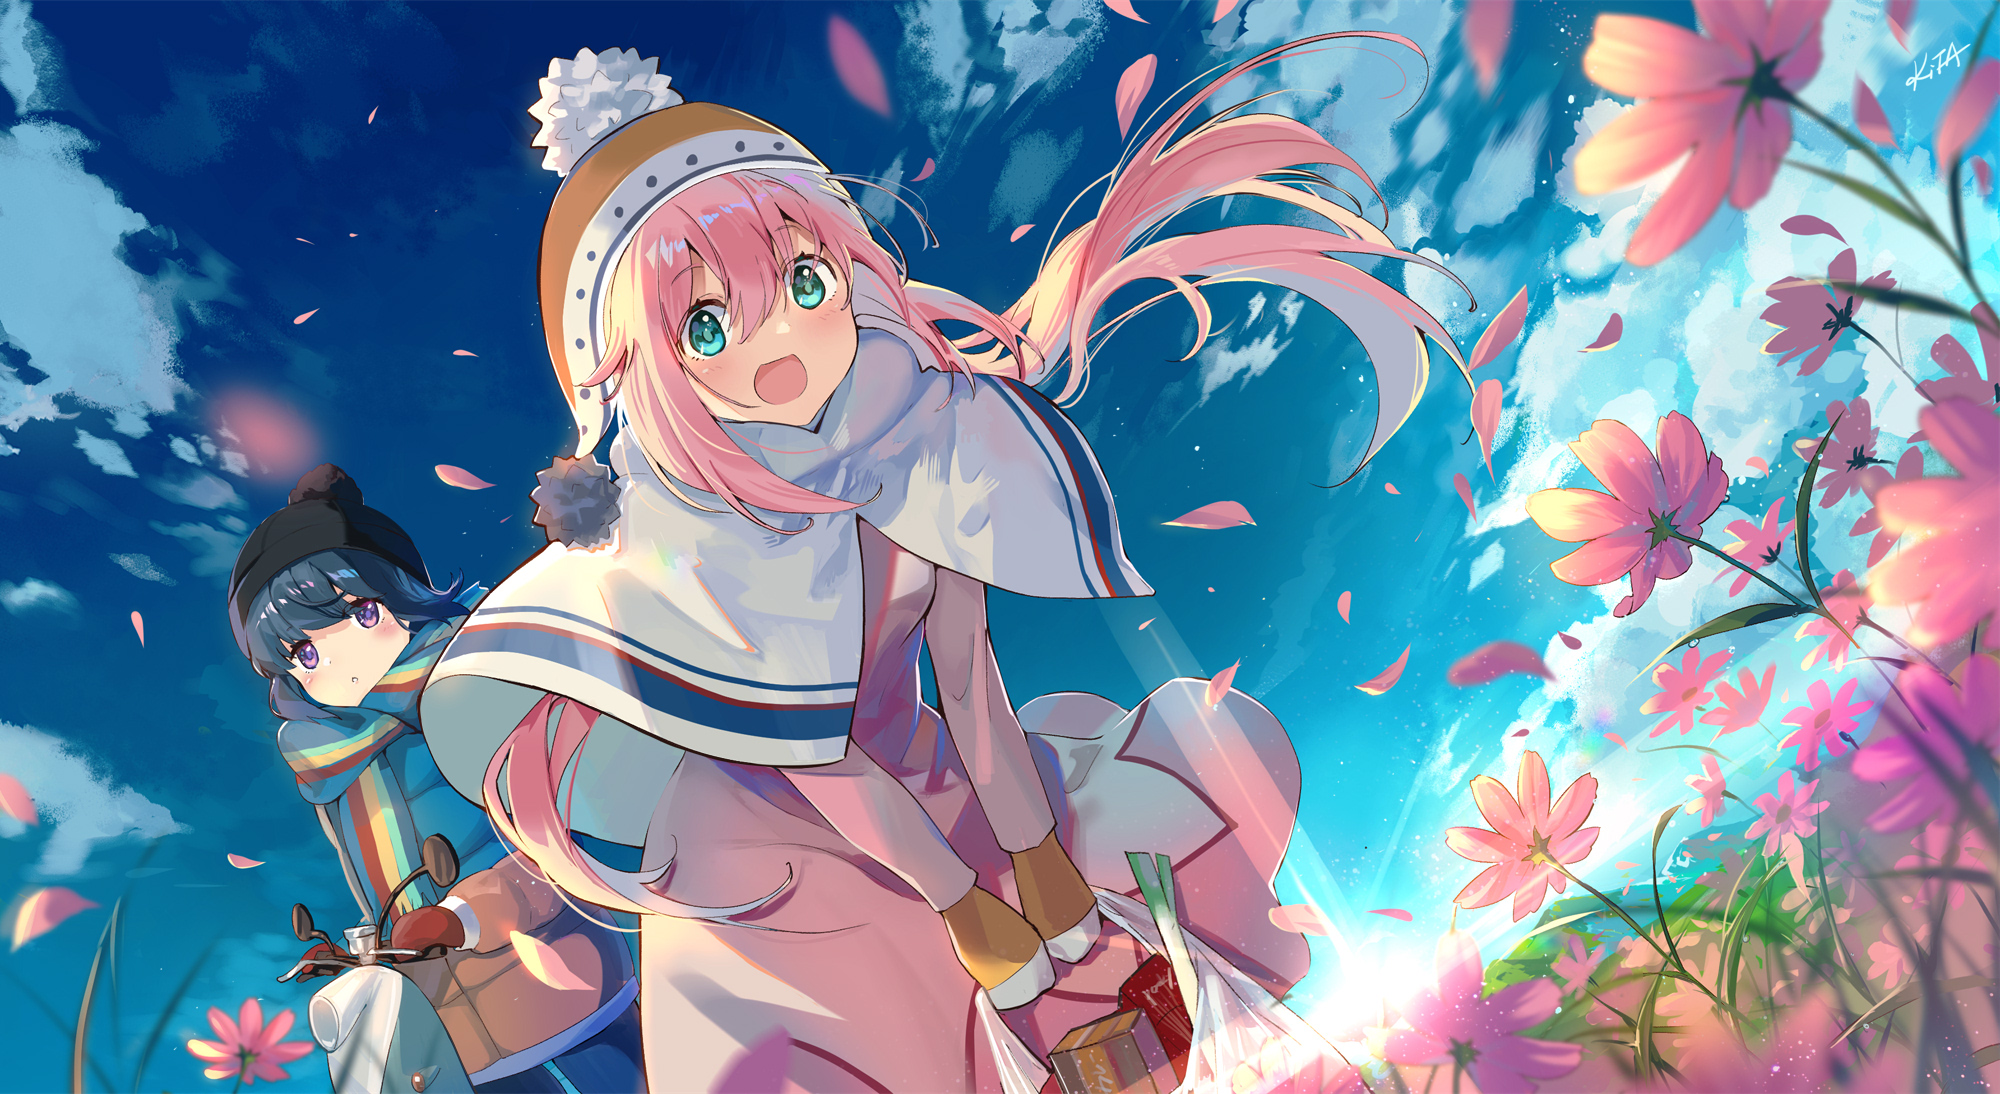 LaidBack Camp Anime Film Features Nadeshiko in First Visual